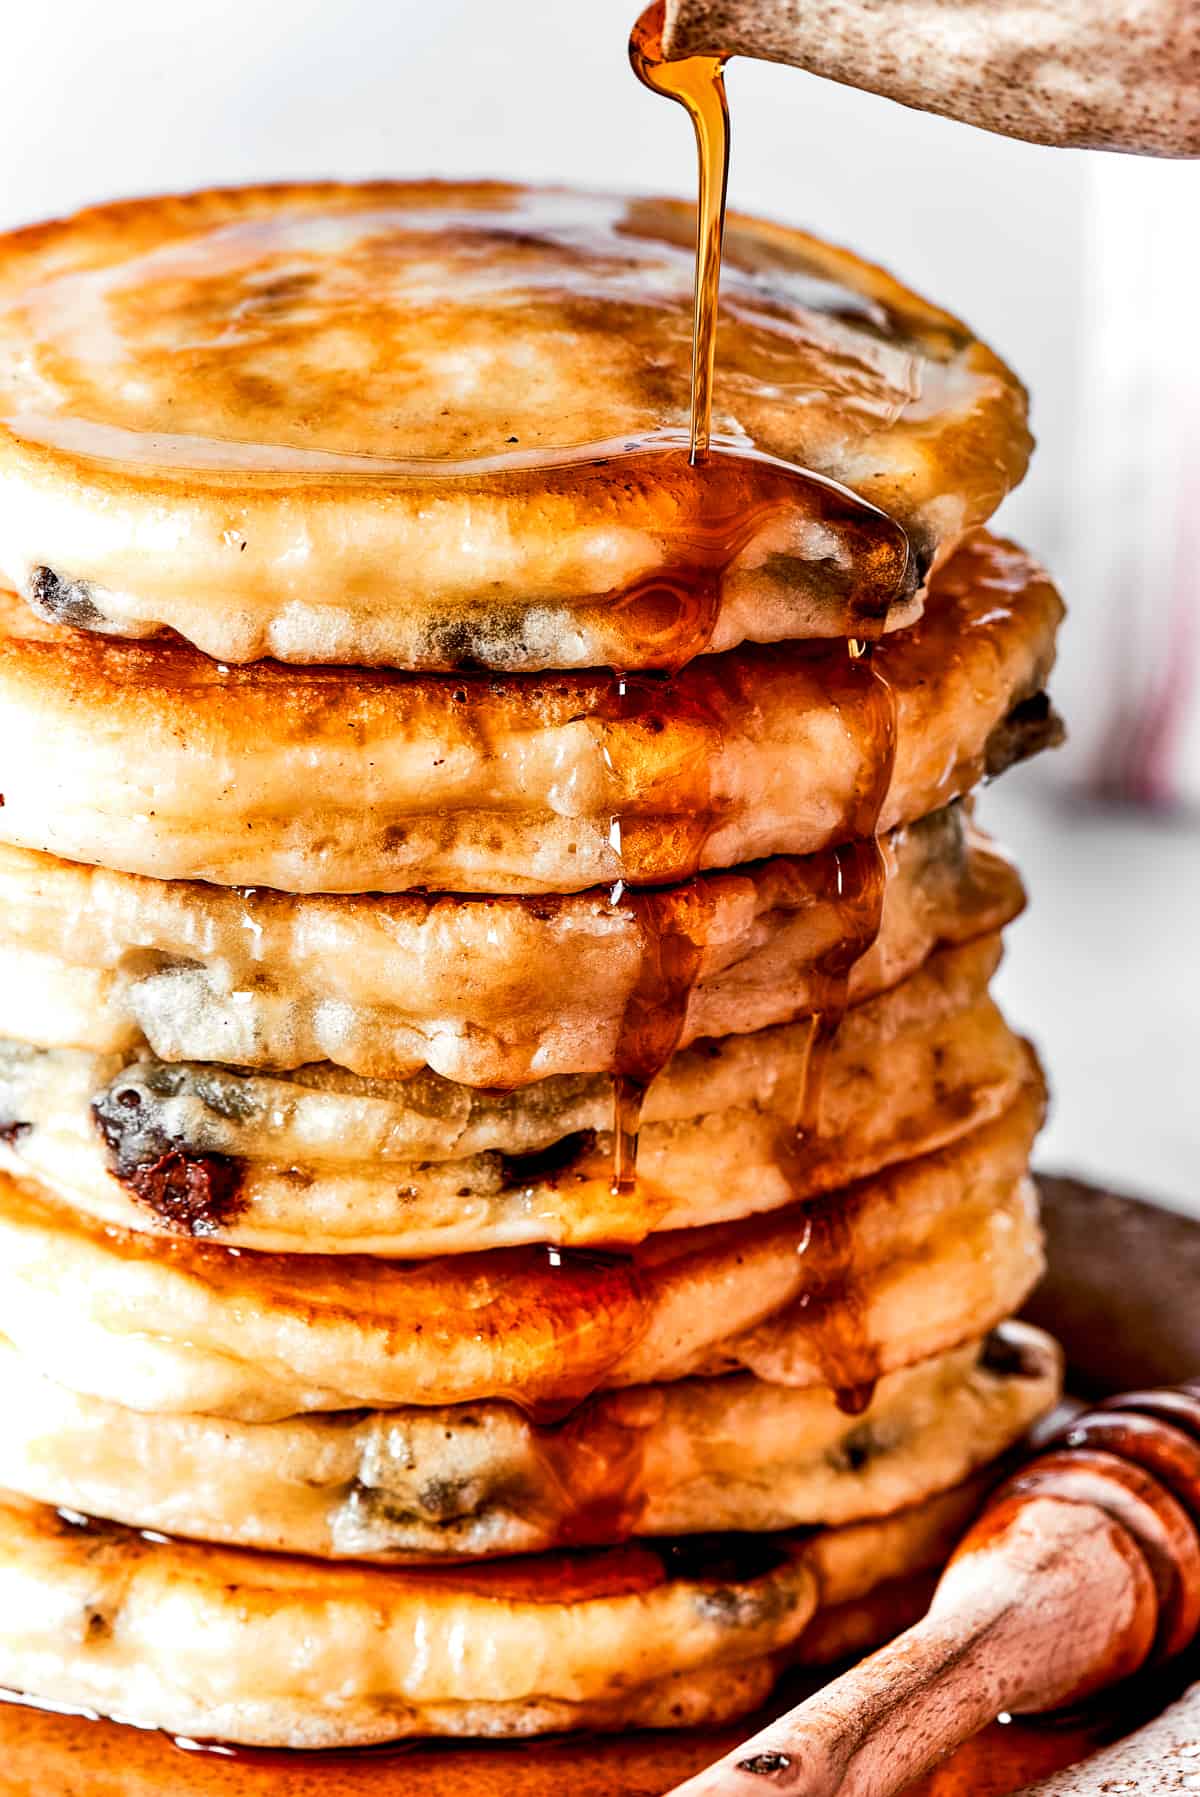 Pouring maple syrup over a stack of fluffy pancakes.